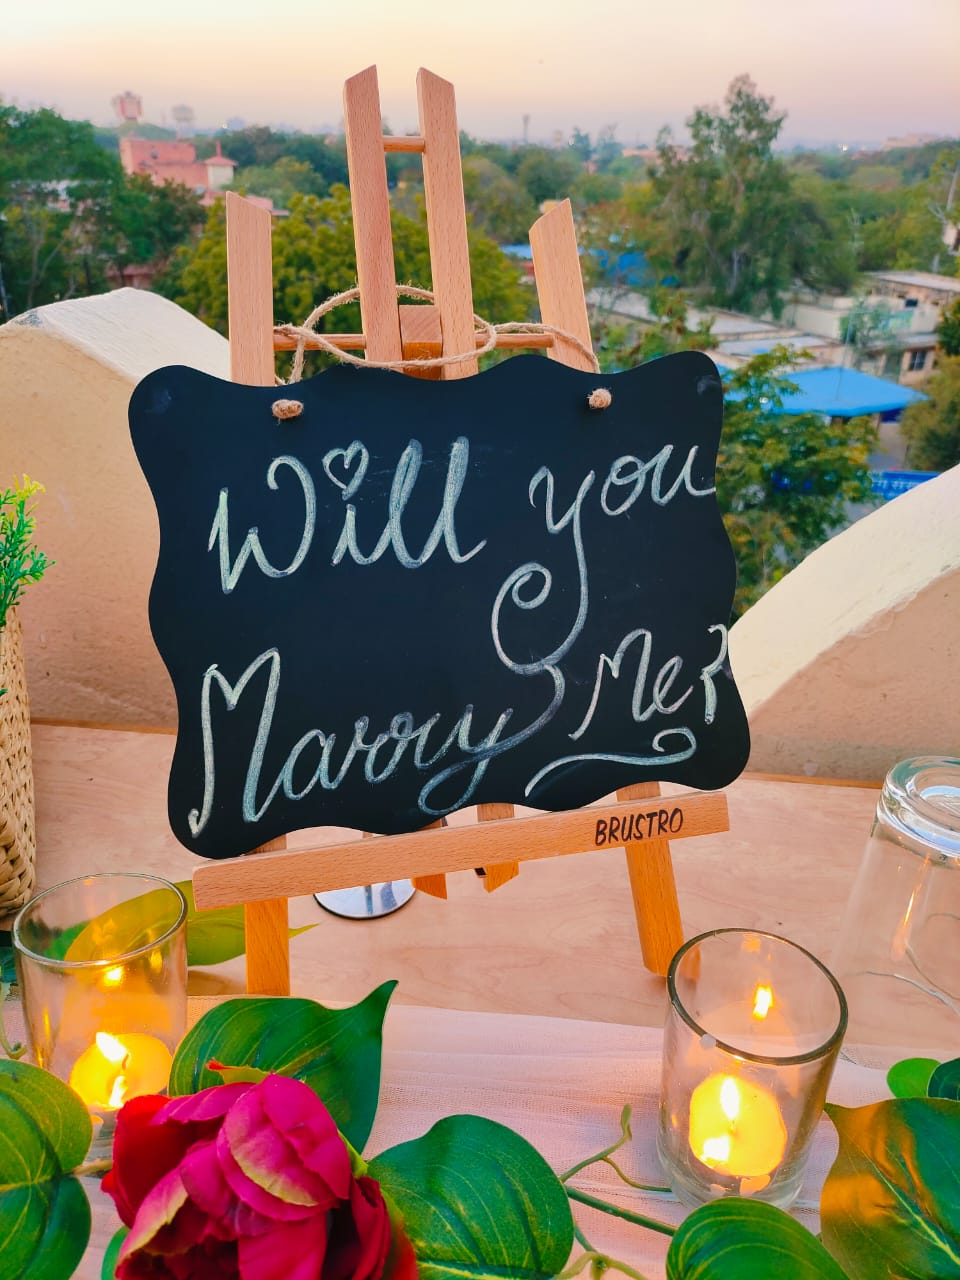 Marry me Proposal